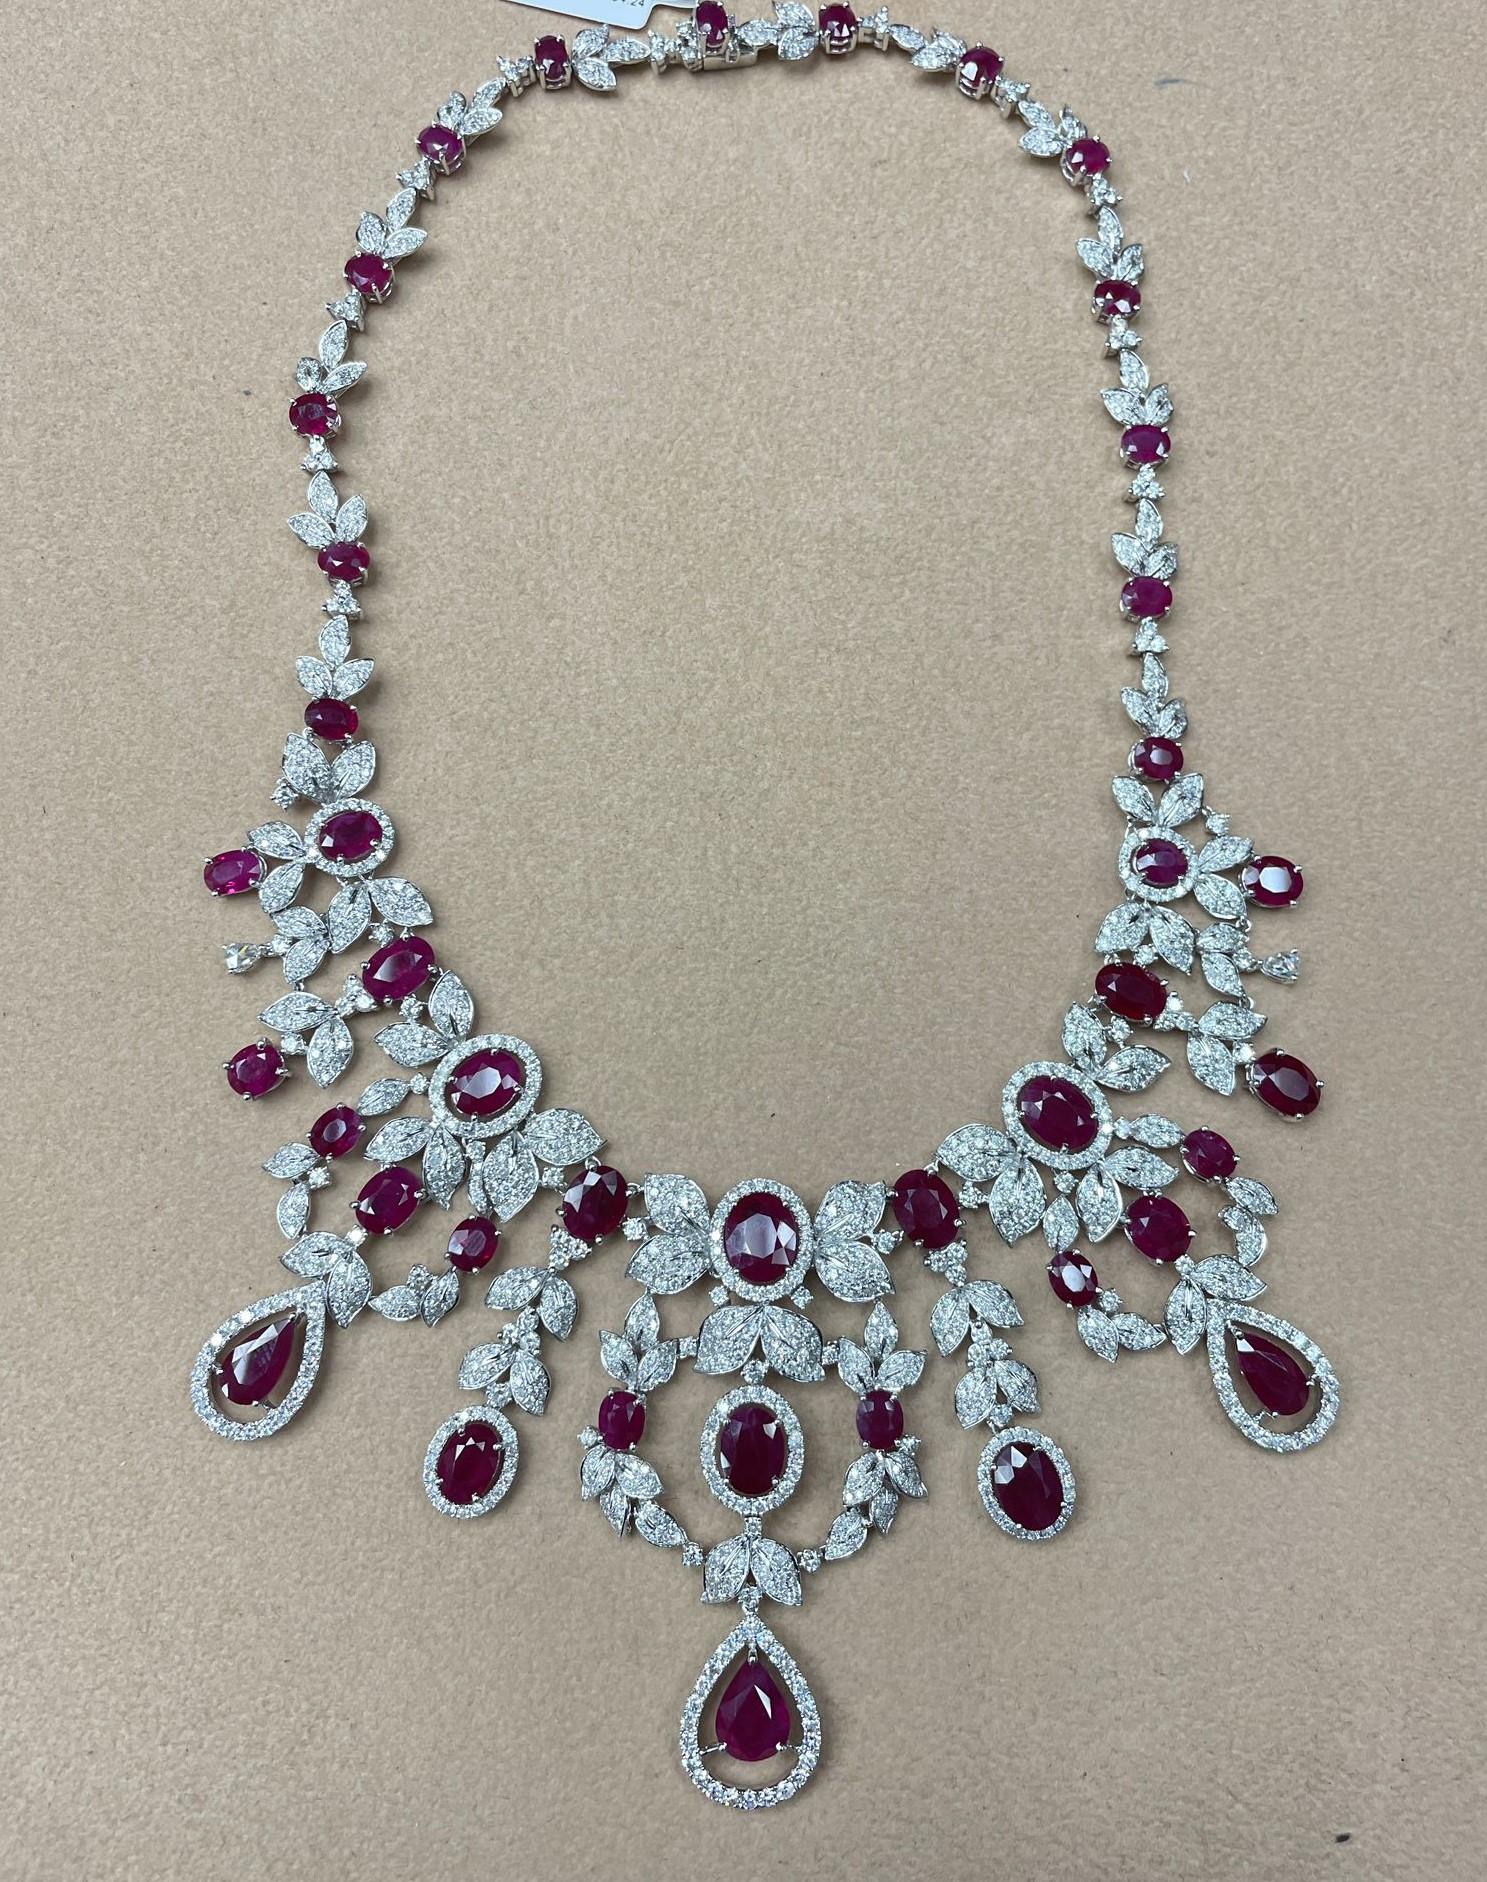 The Following Items we are offering is a Rare Important Radiant 18KT White Gold Fancy Gorgeous Glistening Diamond and Ruby Necklace consisting of Magnificent Rubies and Diamonds. Each Strand contains Spectacular Rubies and Diamonds. Beautifully done